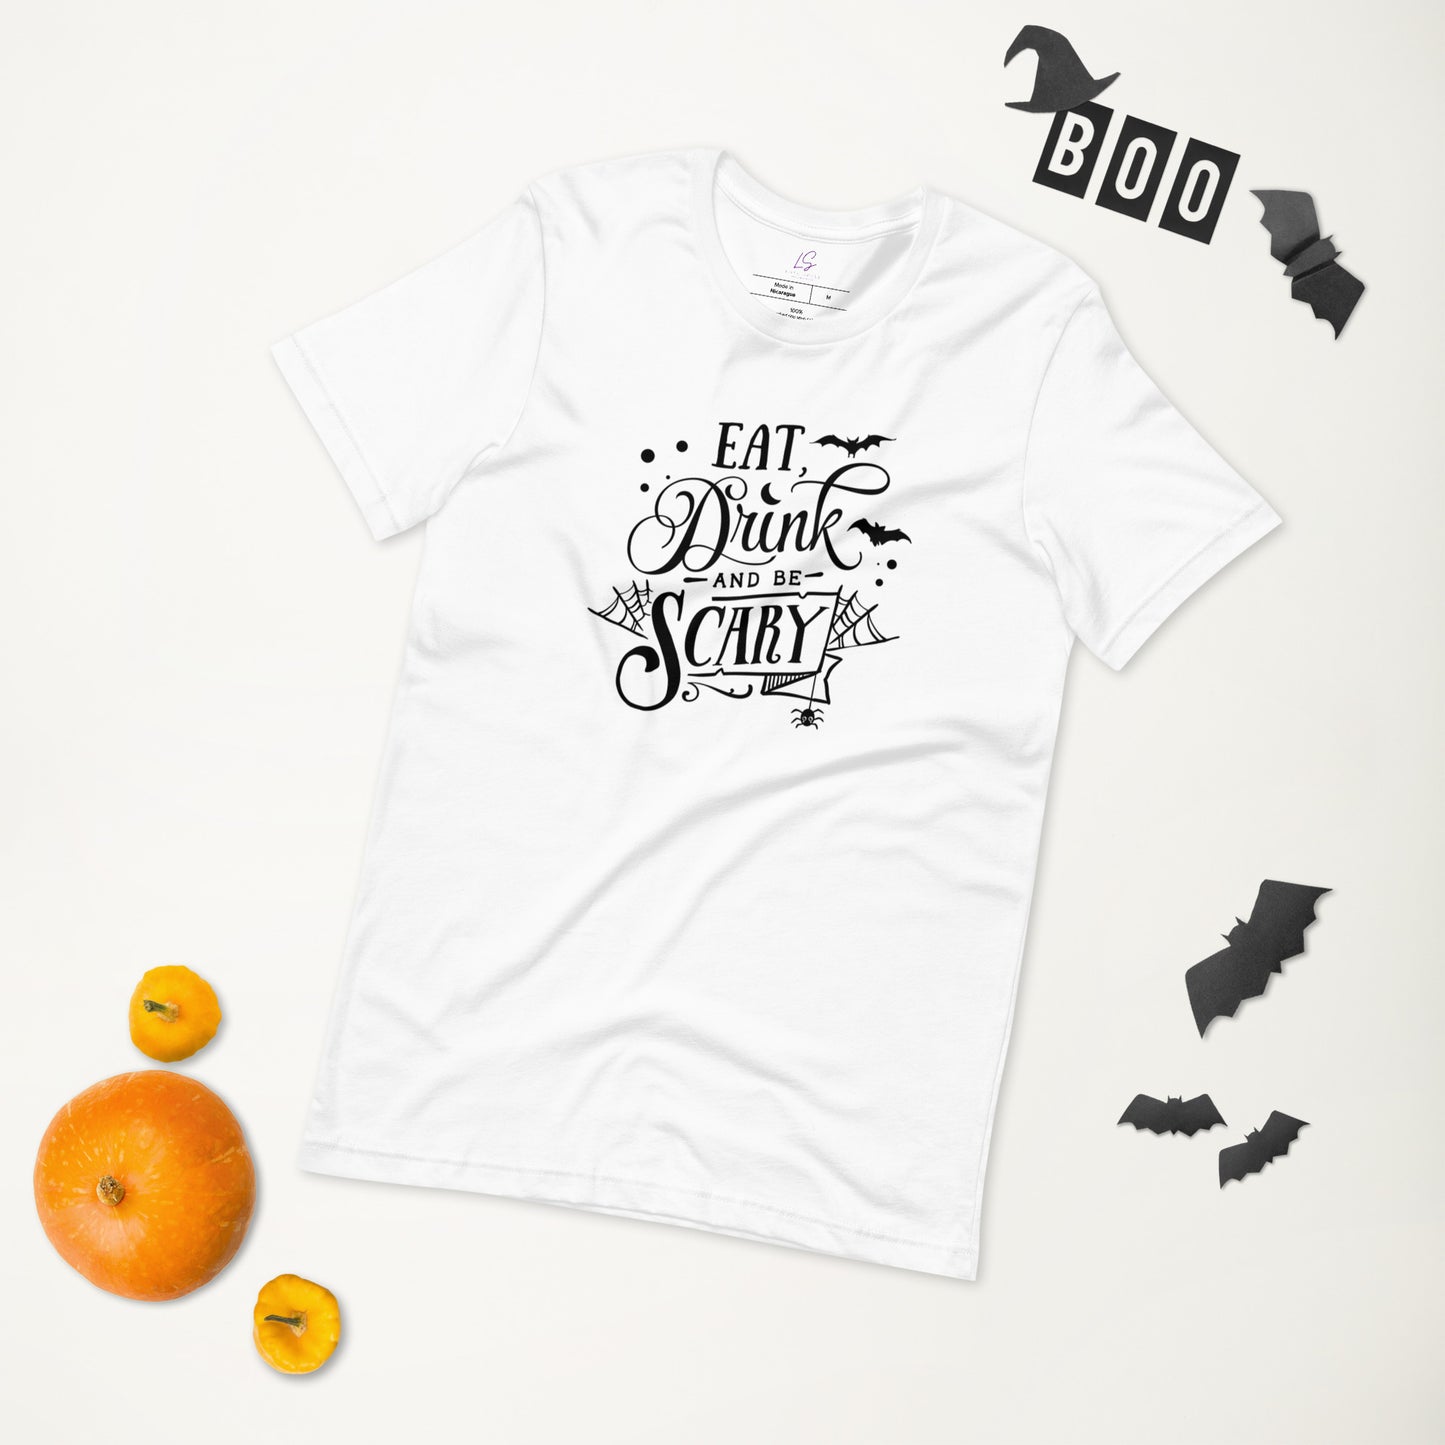 Unisex Tee: Eat Drink and Be Scary